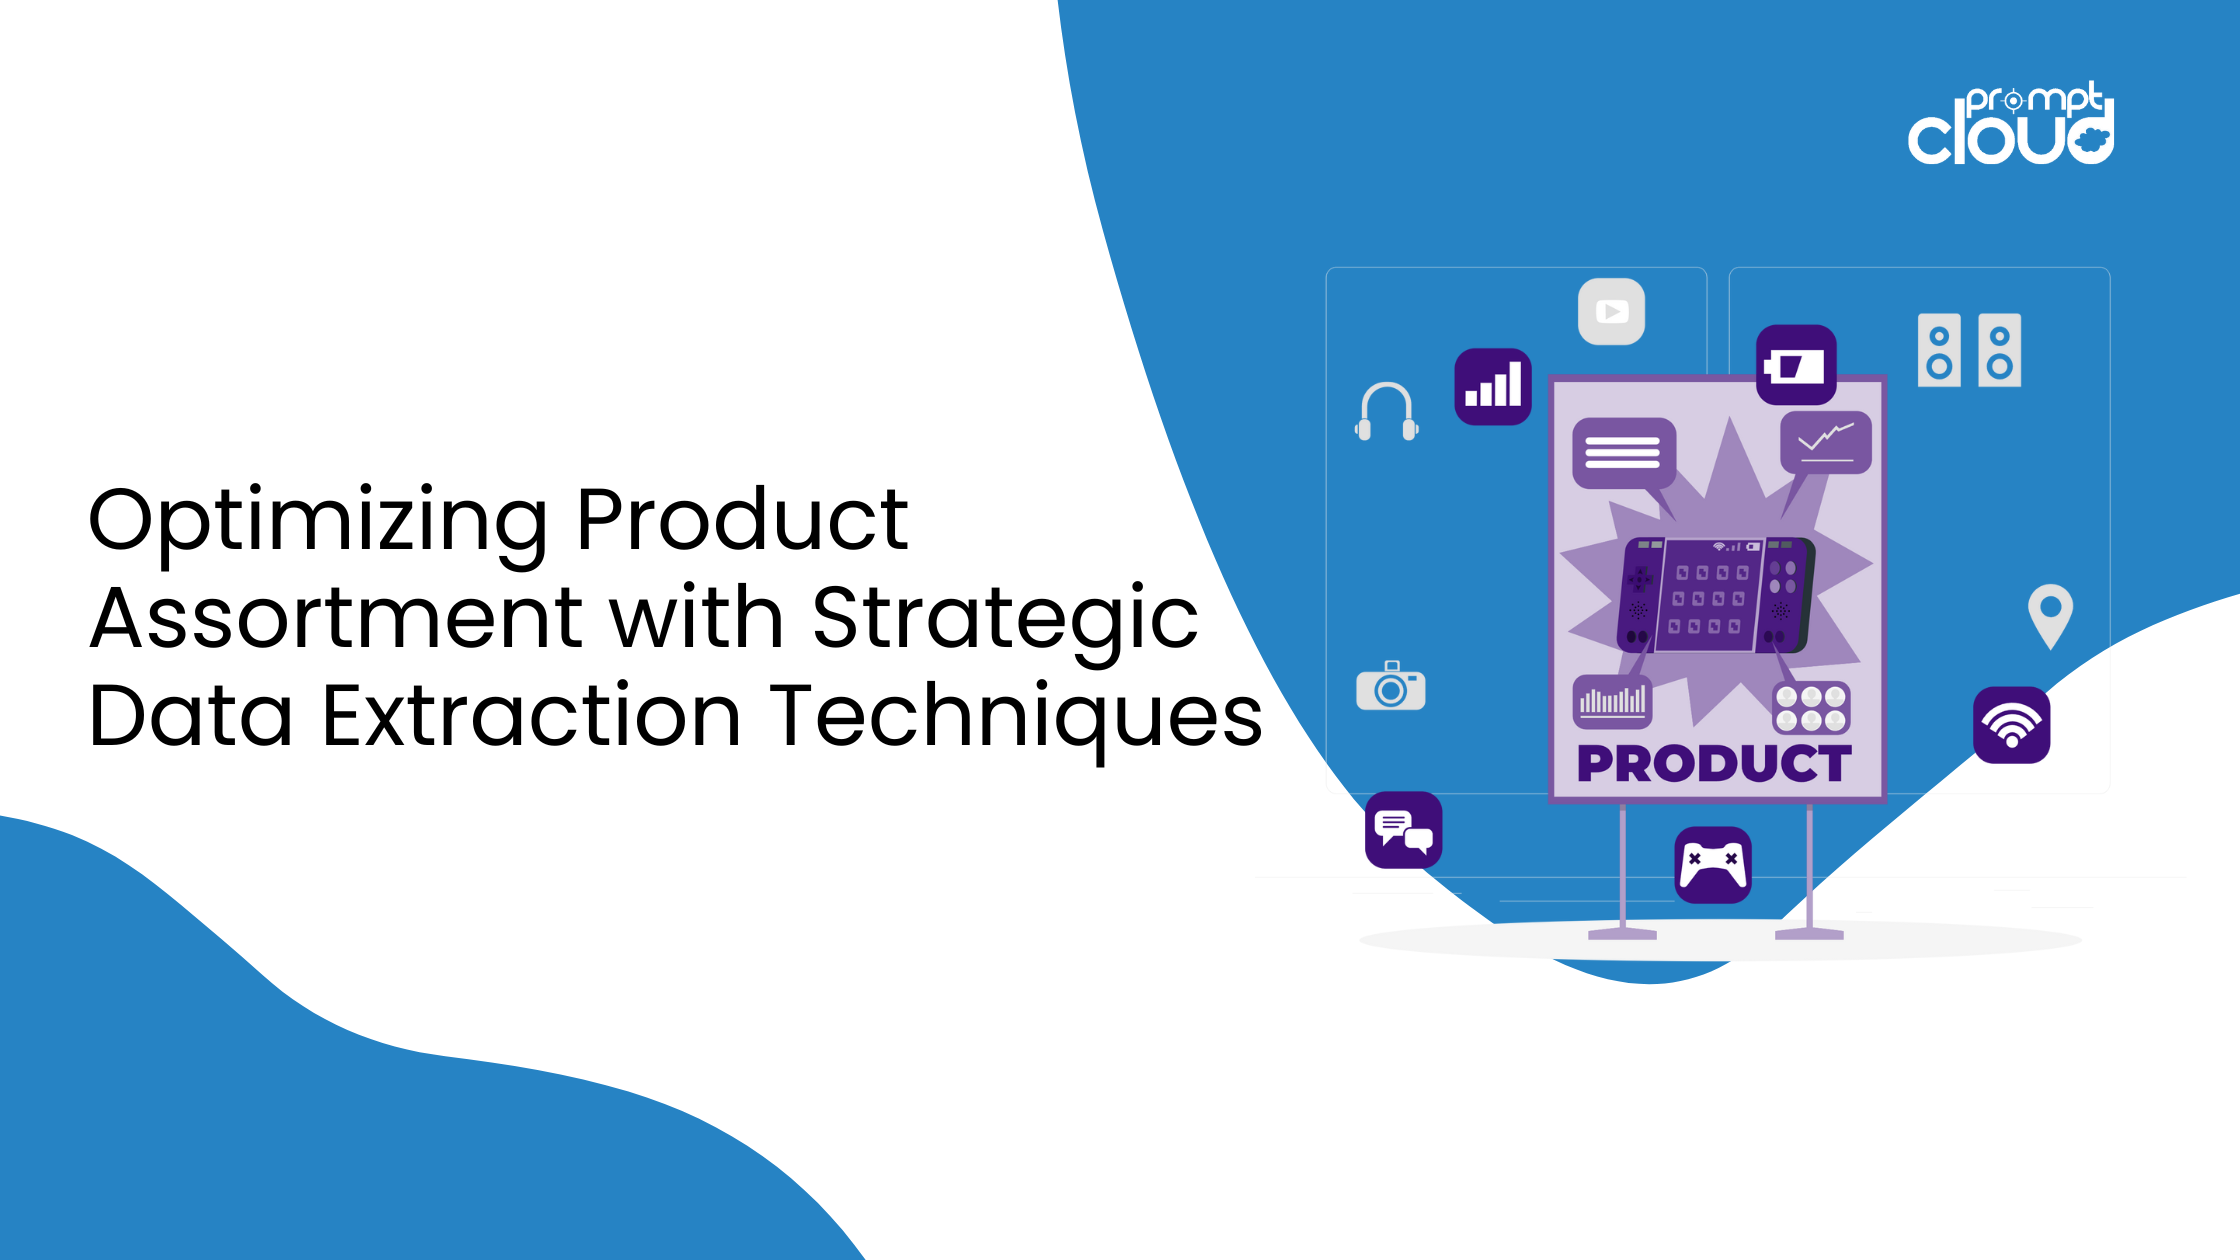 Product Assortment with Data Extraction Techniques